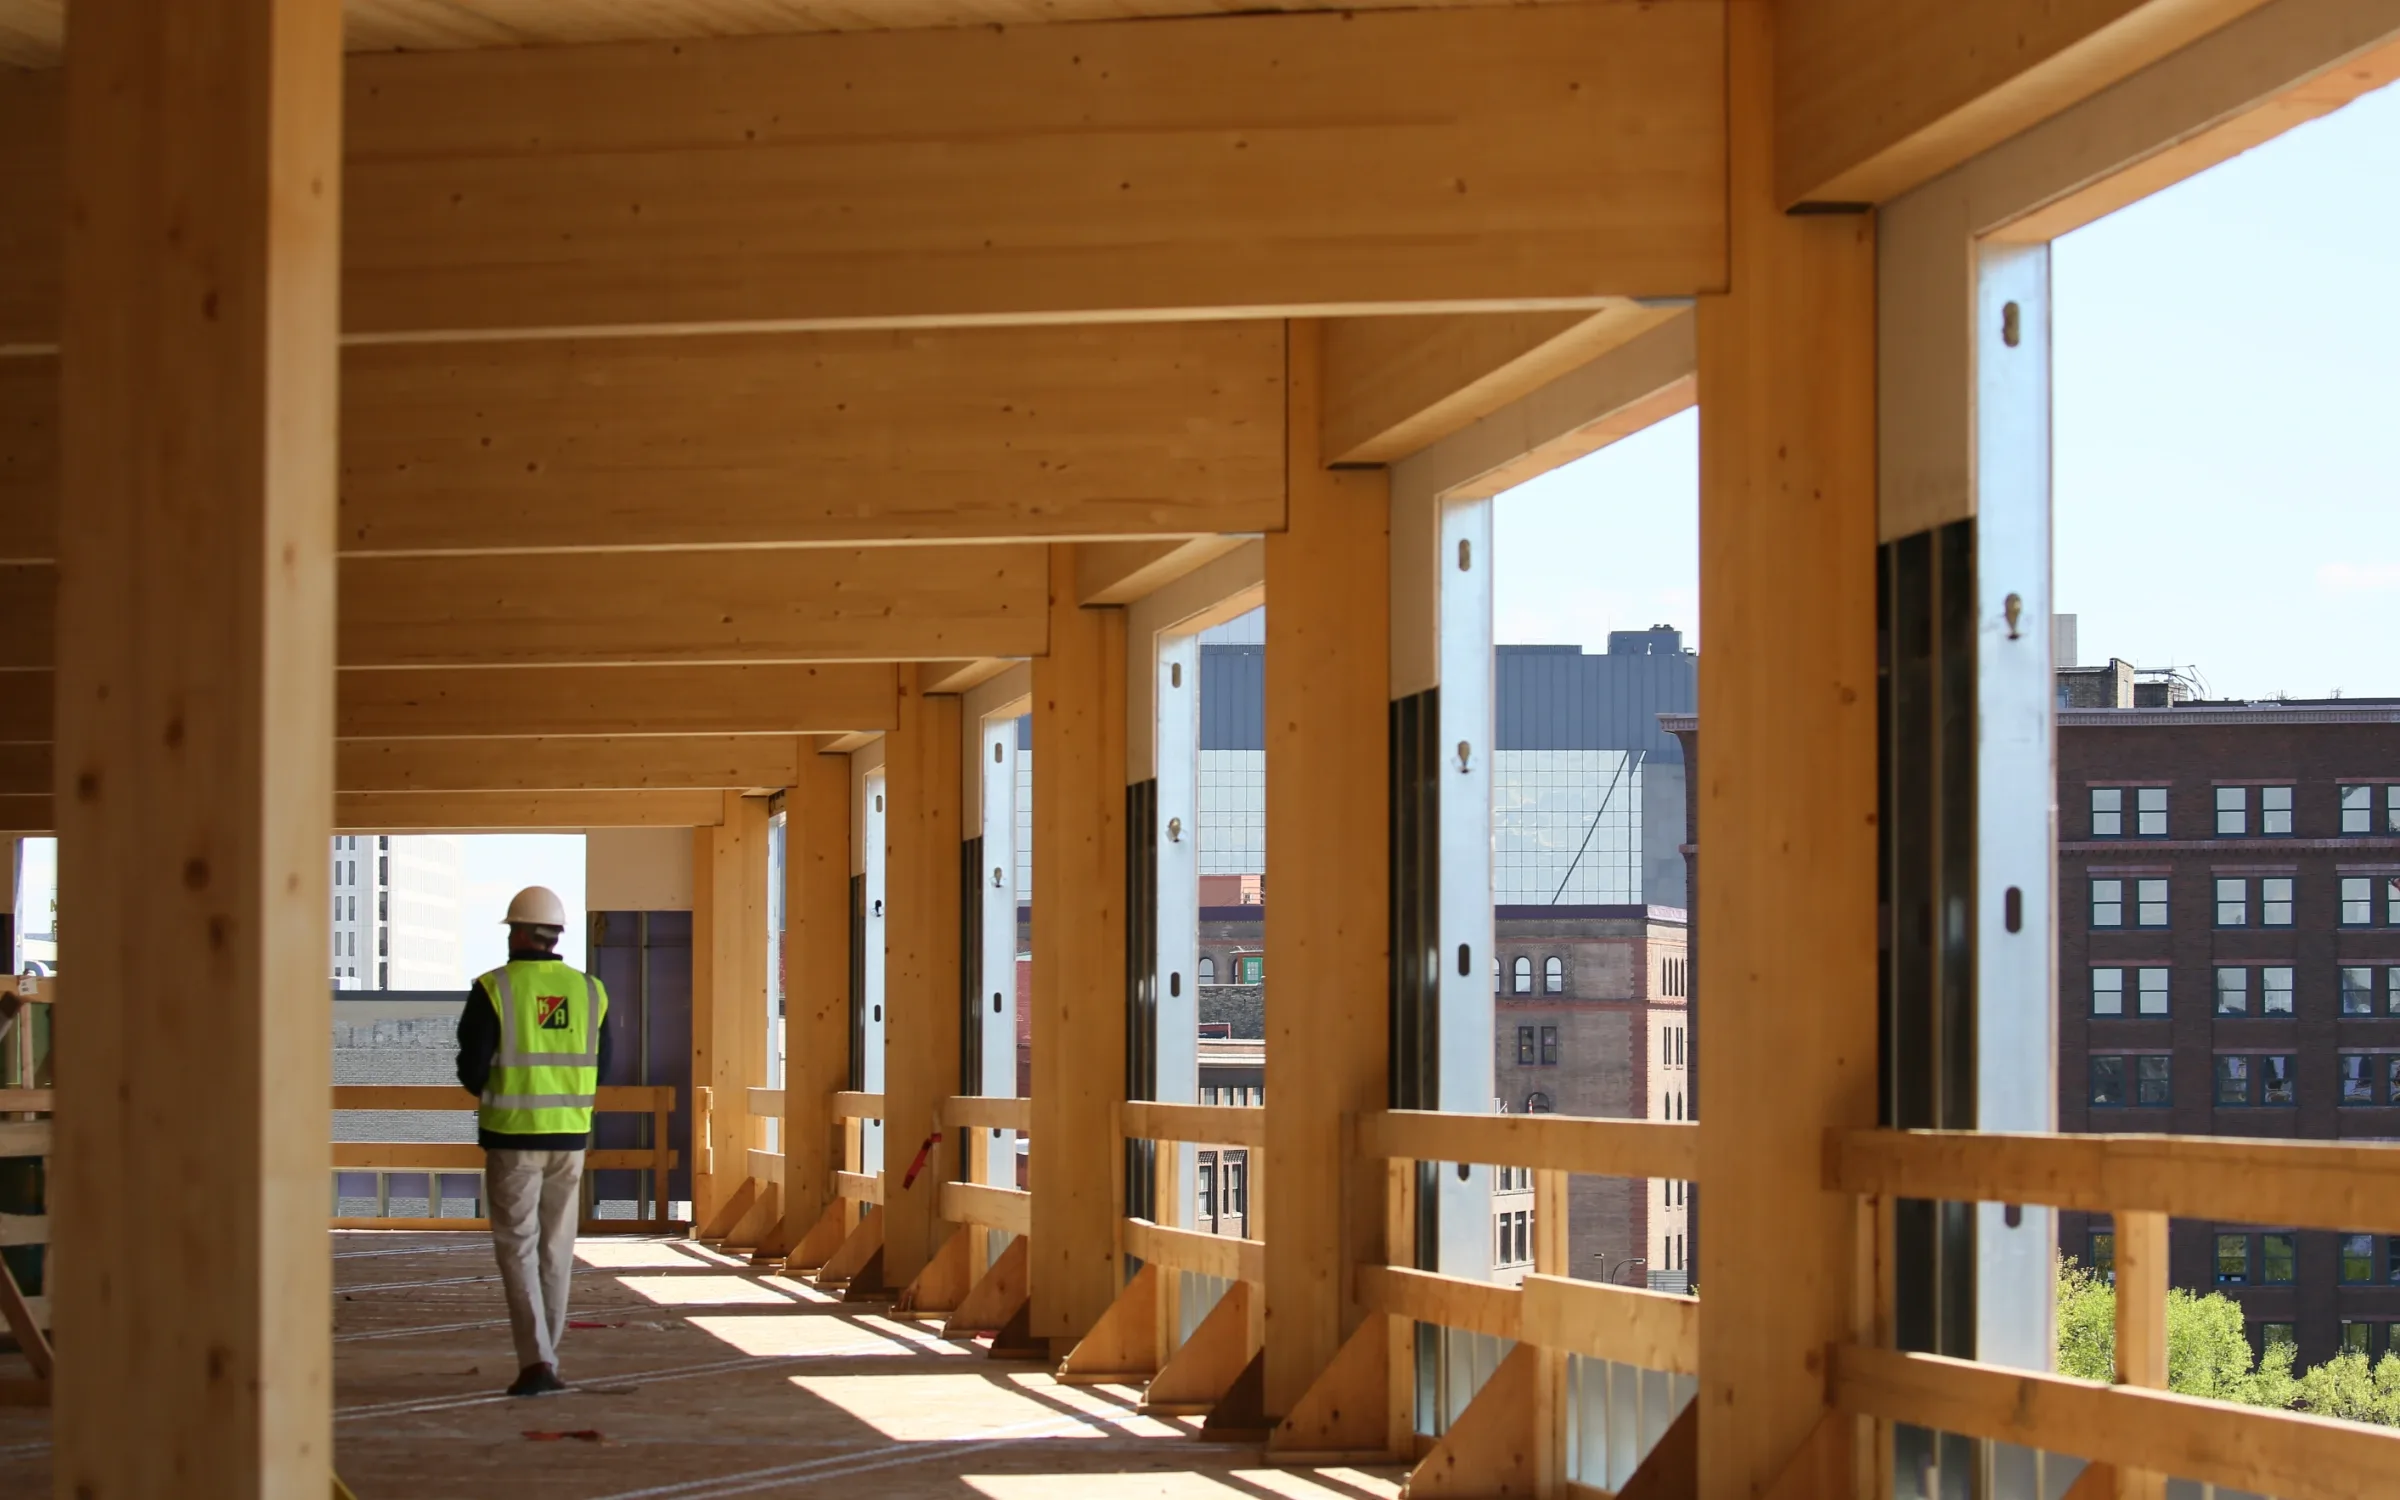 Embracing mass timber: what’s real, what's a myth?